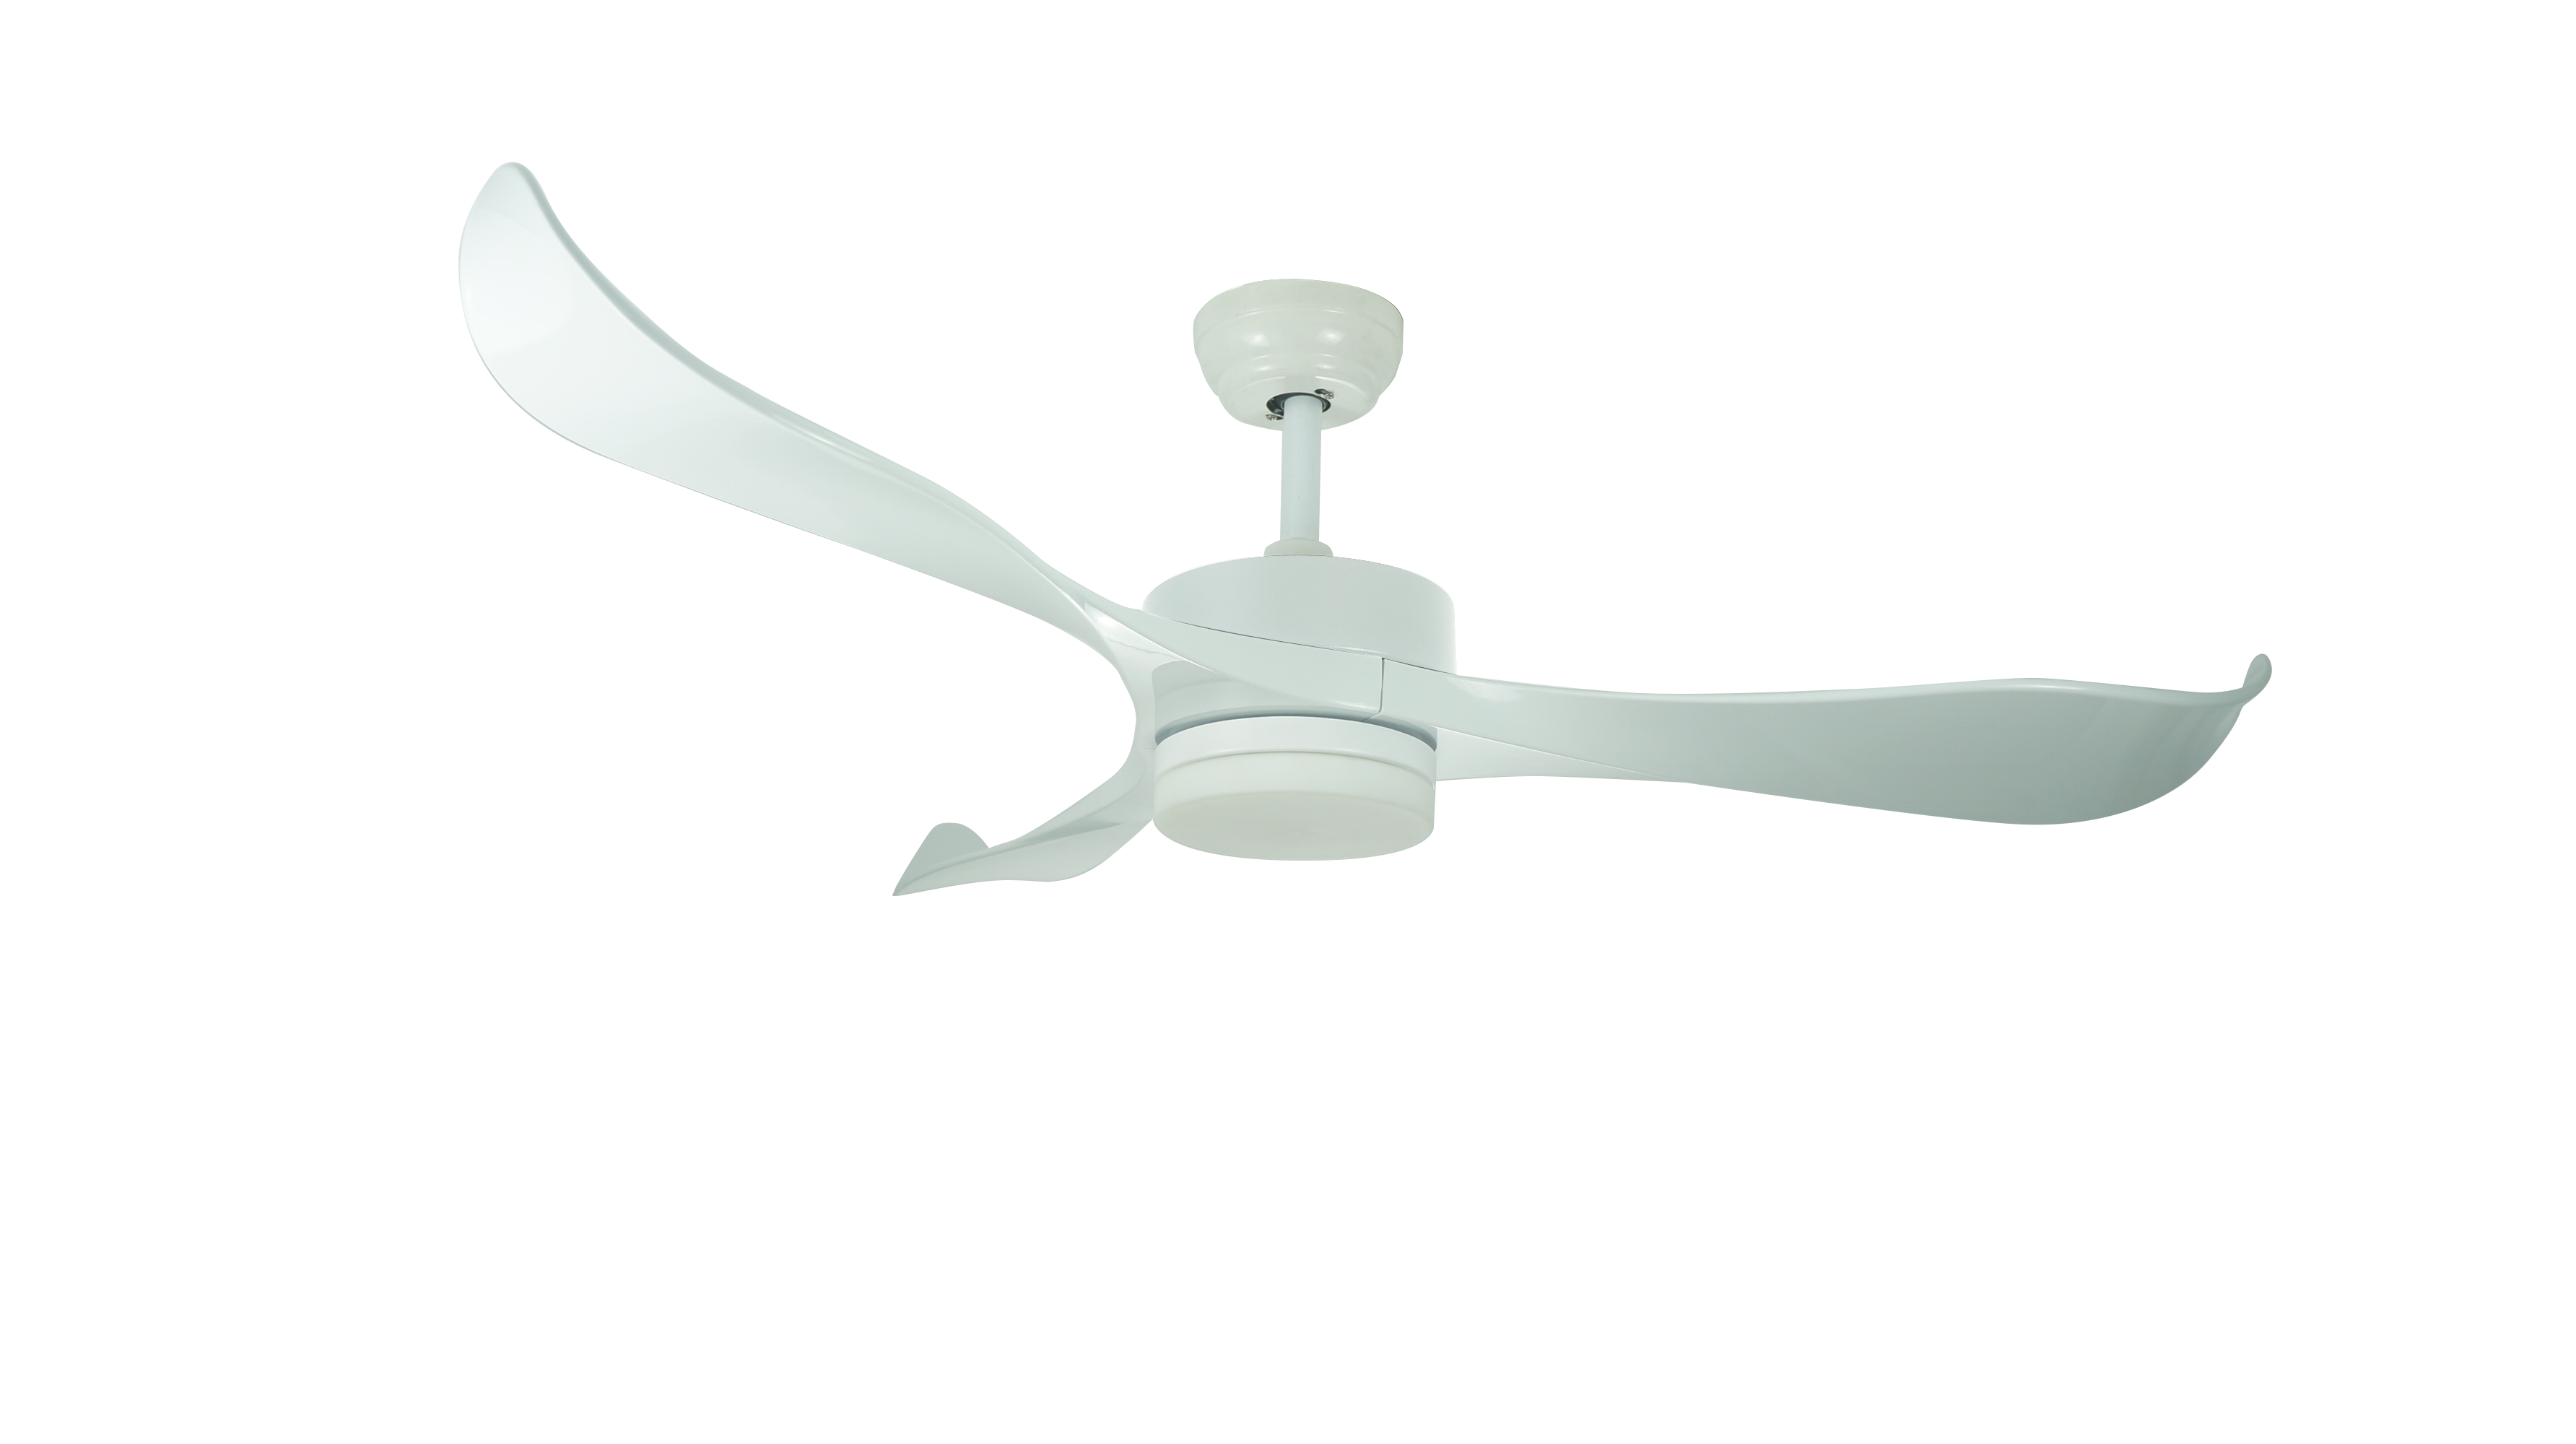 52inch Modern DC Motor Decorative Ceiling Fan Nature Air Flow Soft Warm Led Lamp